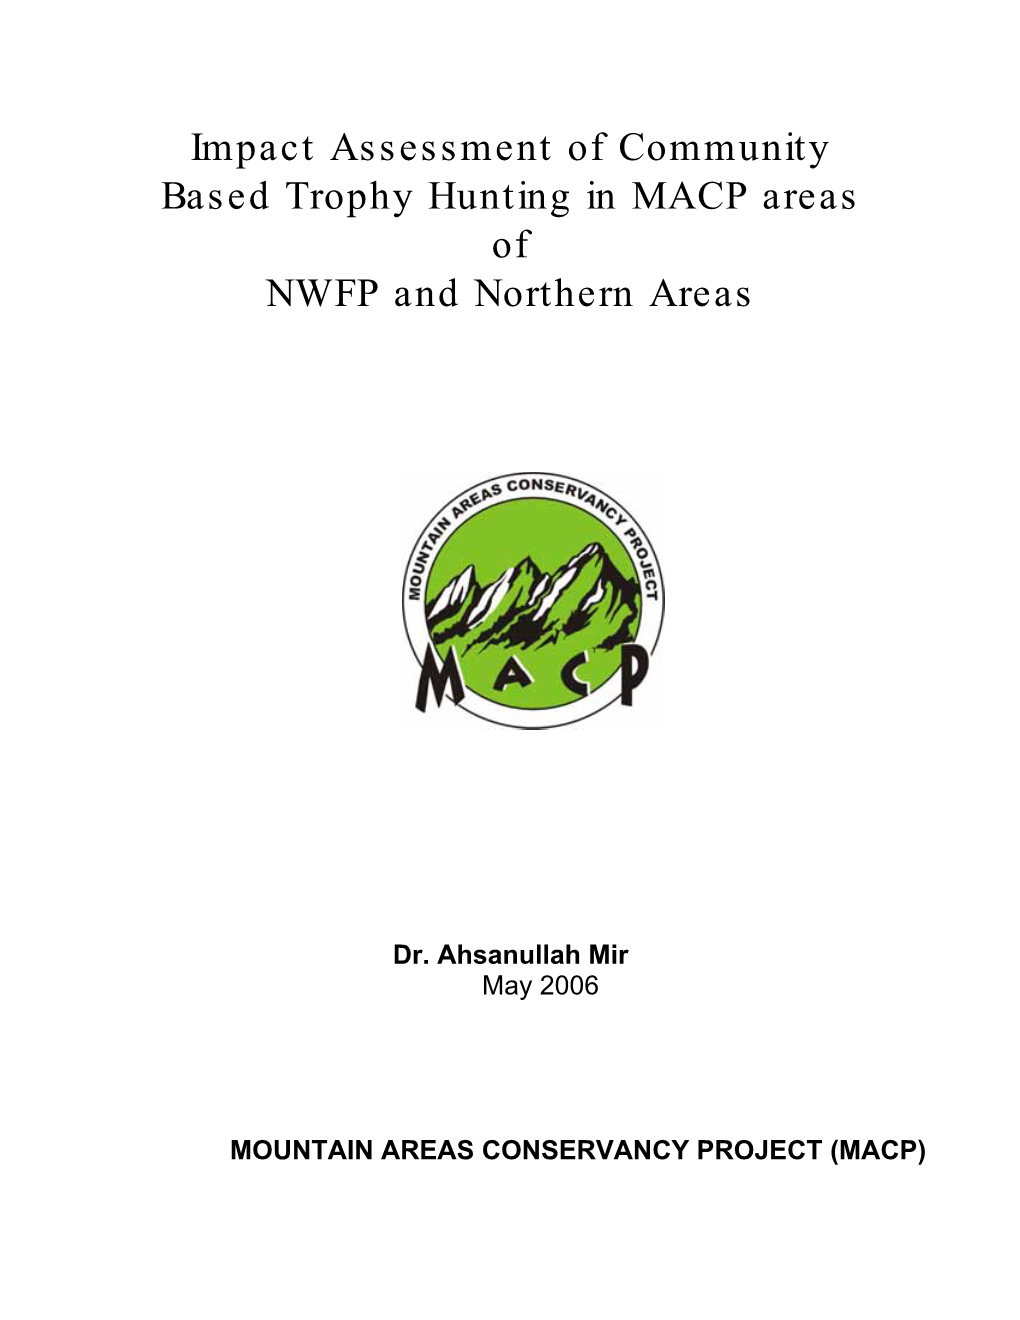 Impact Assessment of Big Game Trophy Hunting in MACP Areas